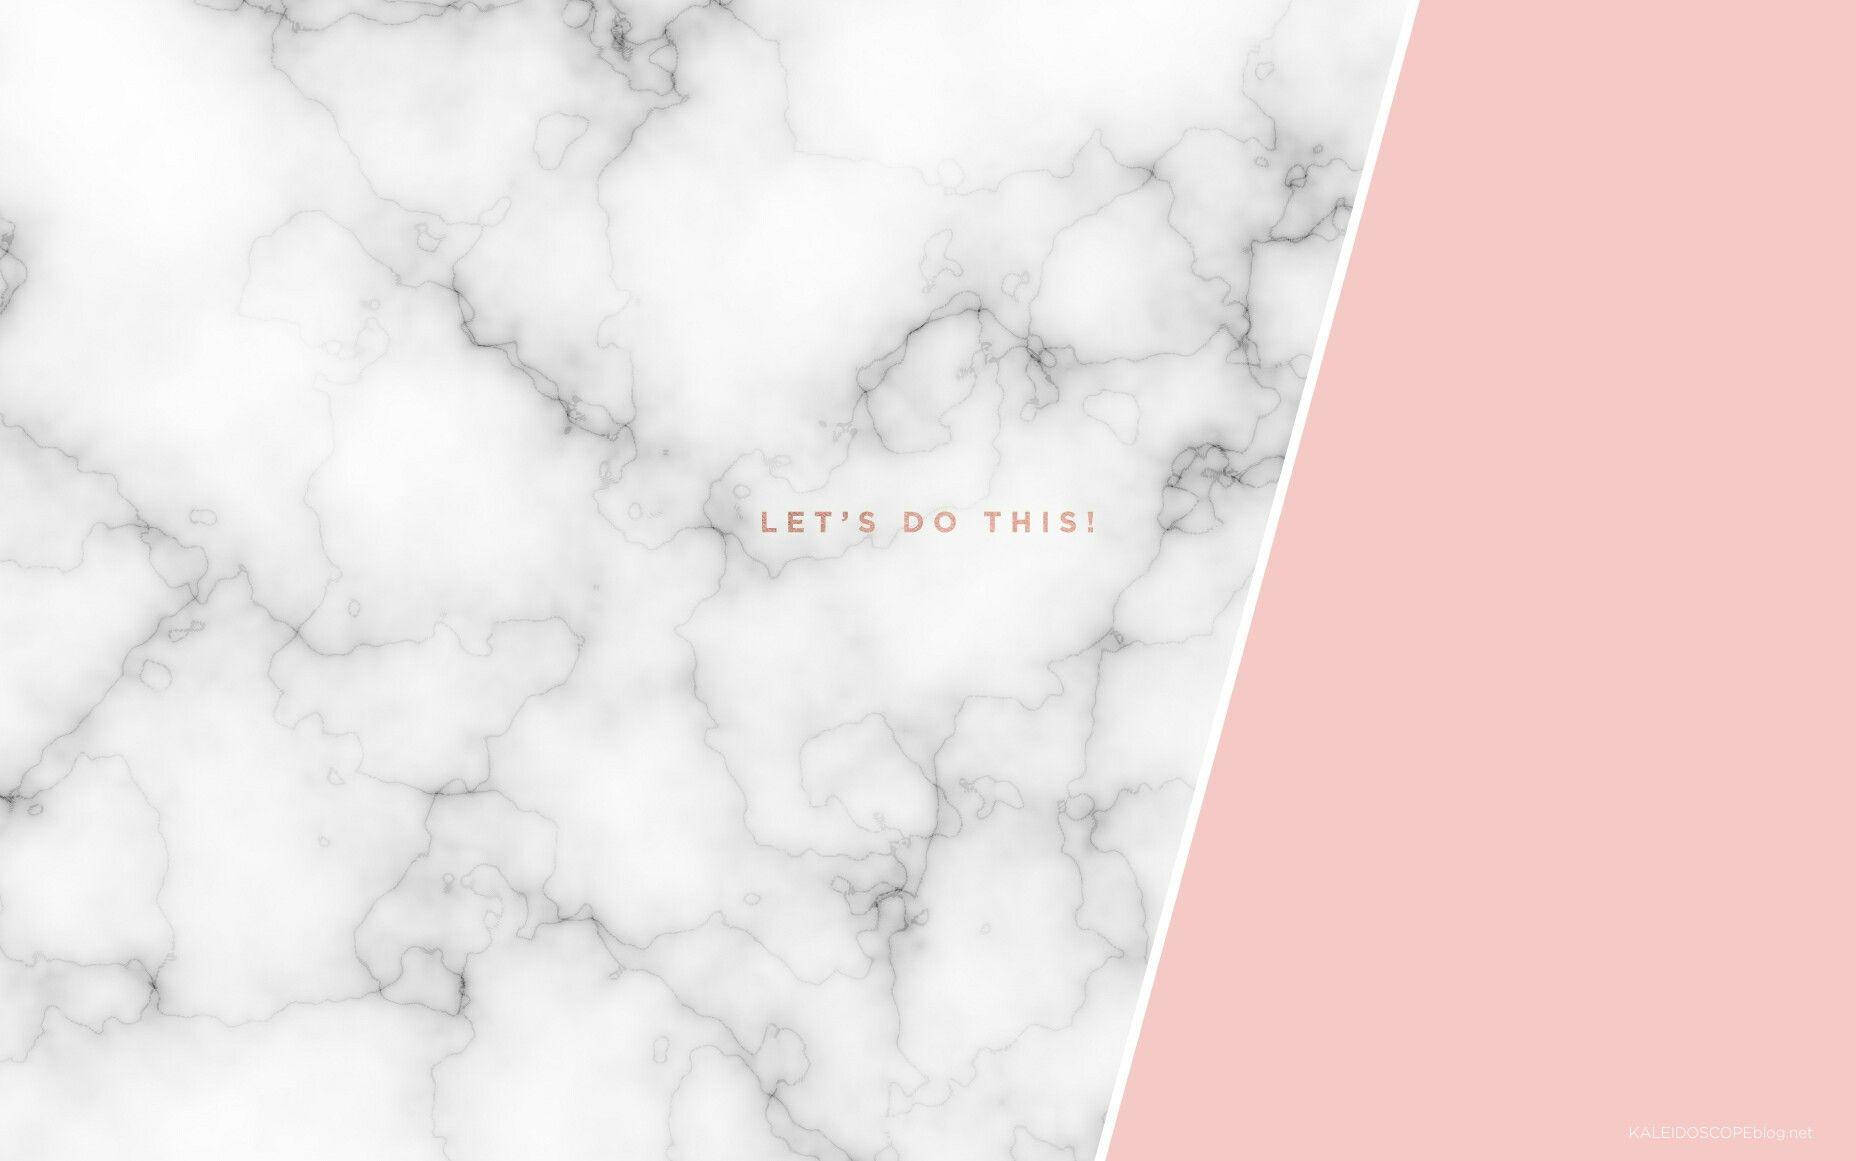 Embrace The Minimalism - White Marble Aesthetic With A Touch Of Pink.